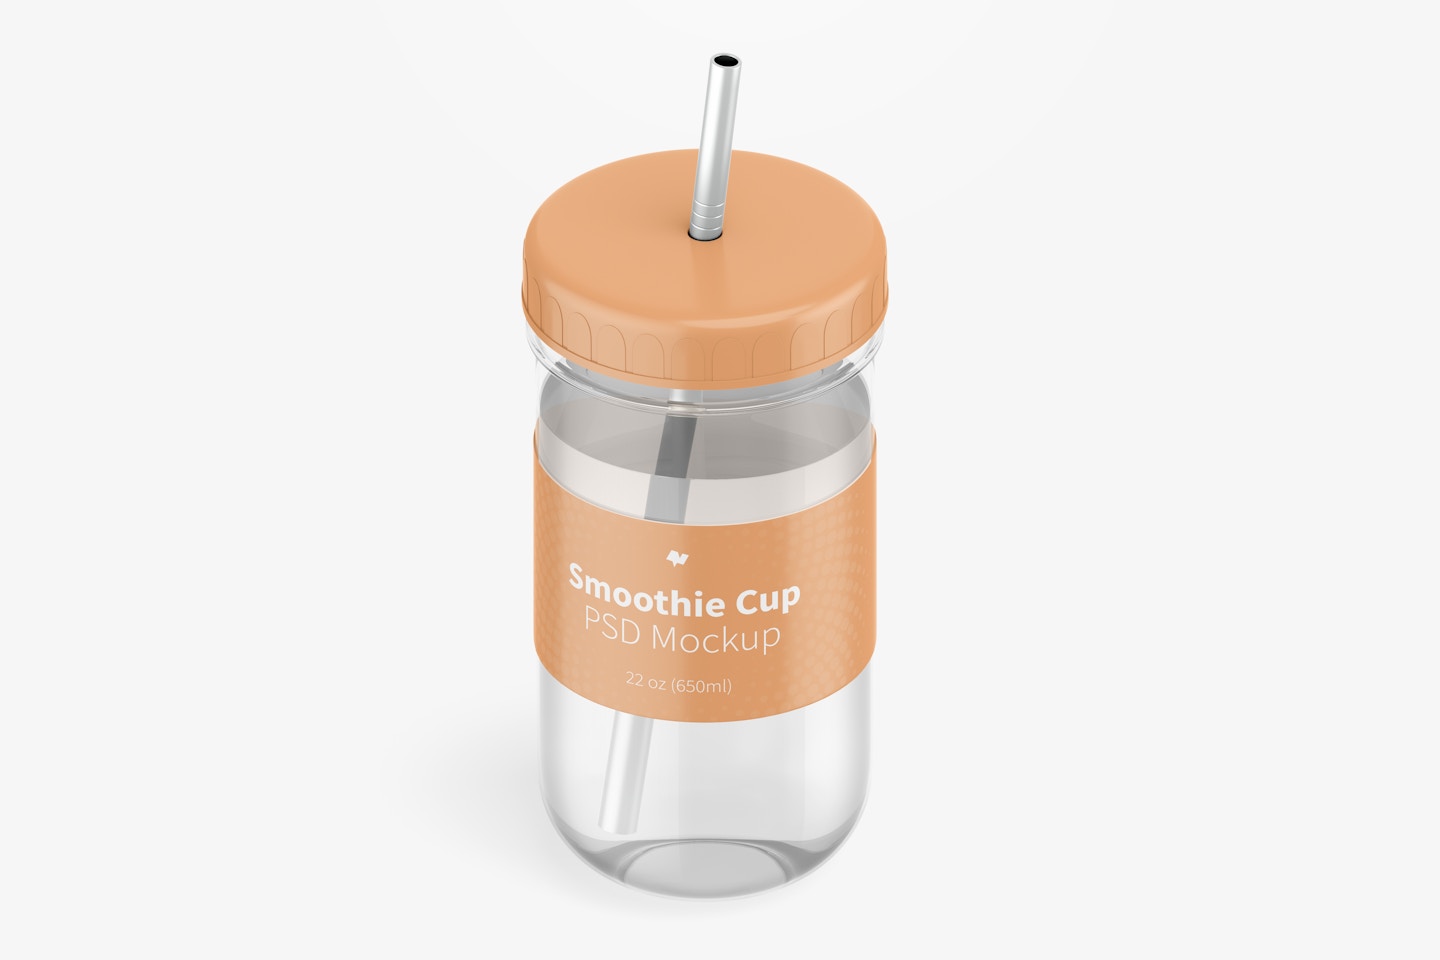 Smoothie Cup with Lid Mockup, Isometric View